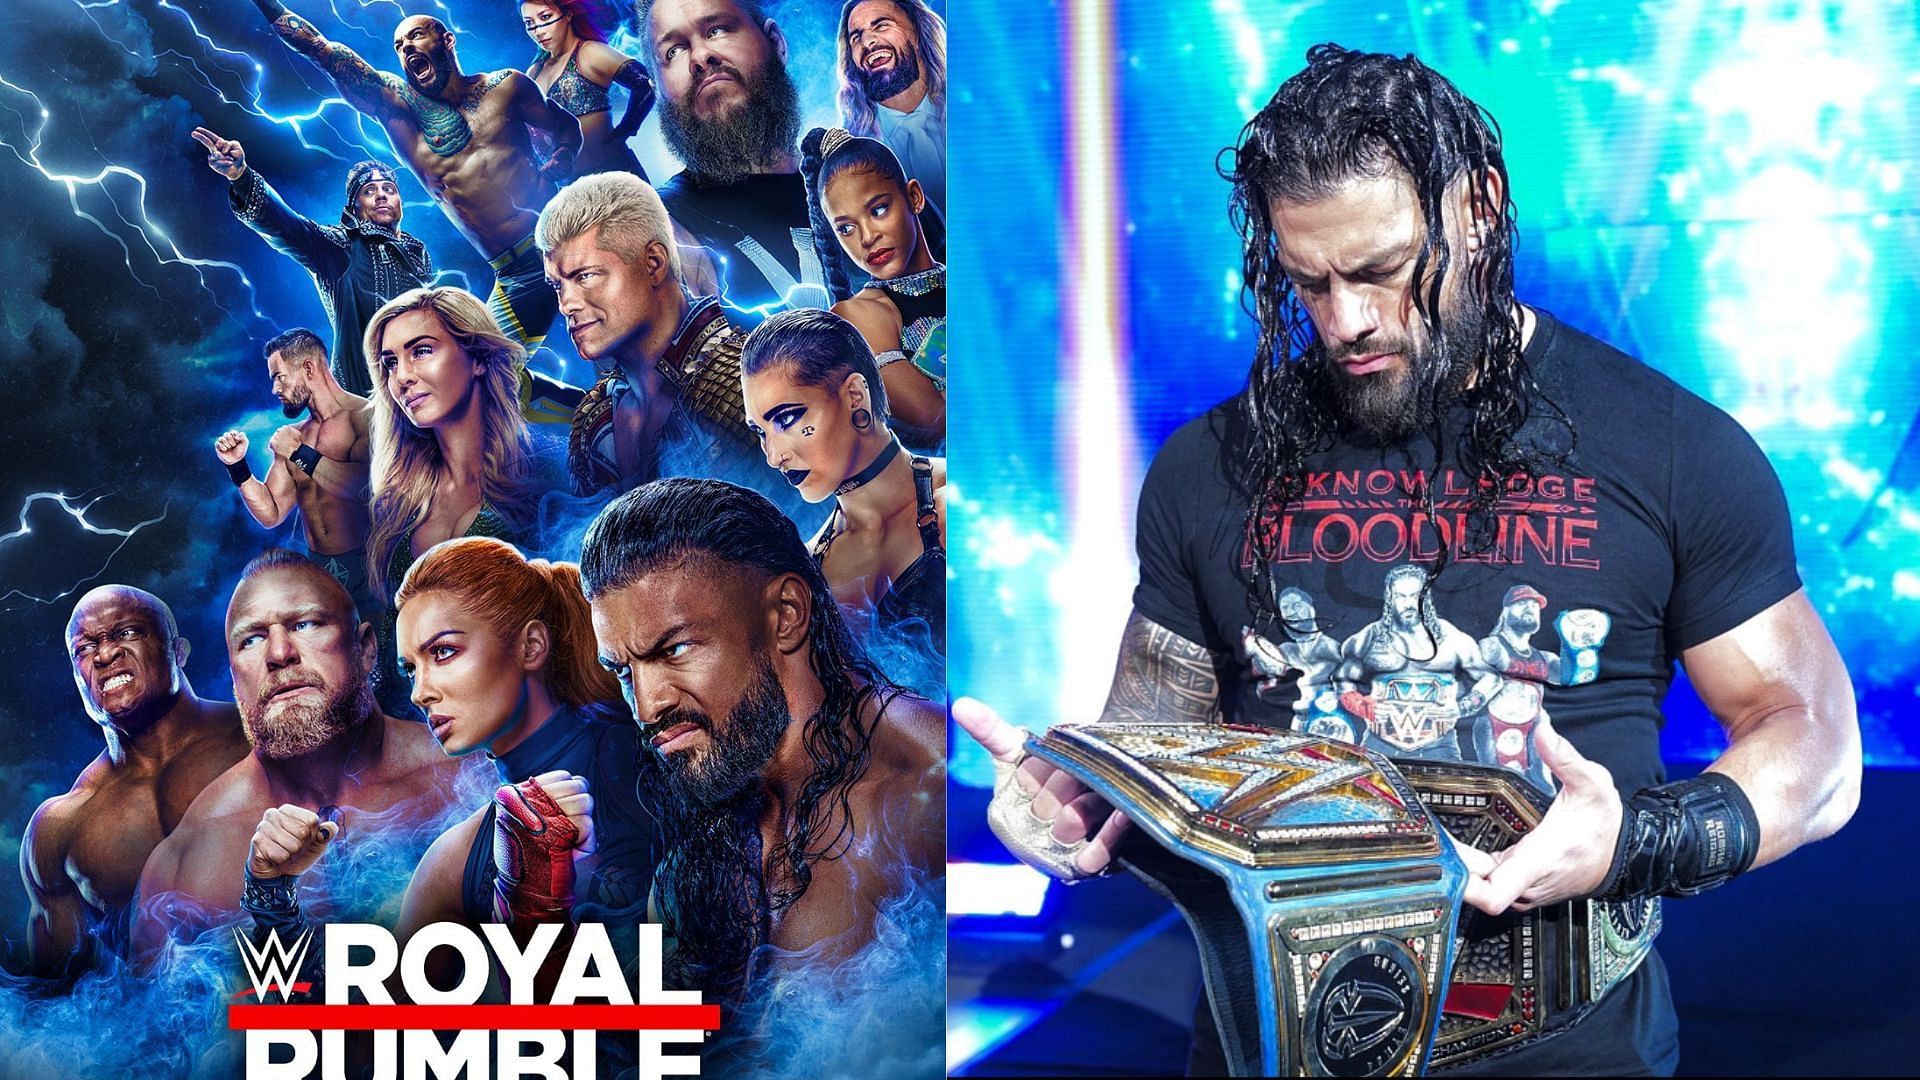 WWE Royal Rumble 2023 could have been made better with these additions